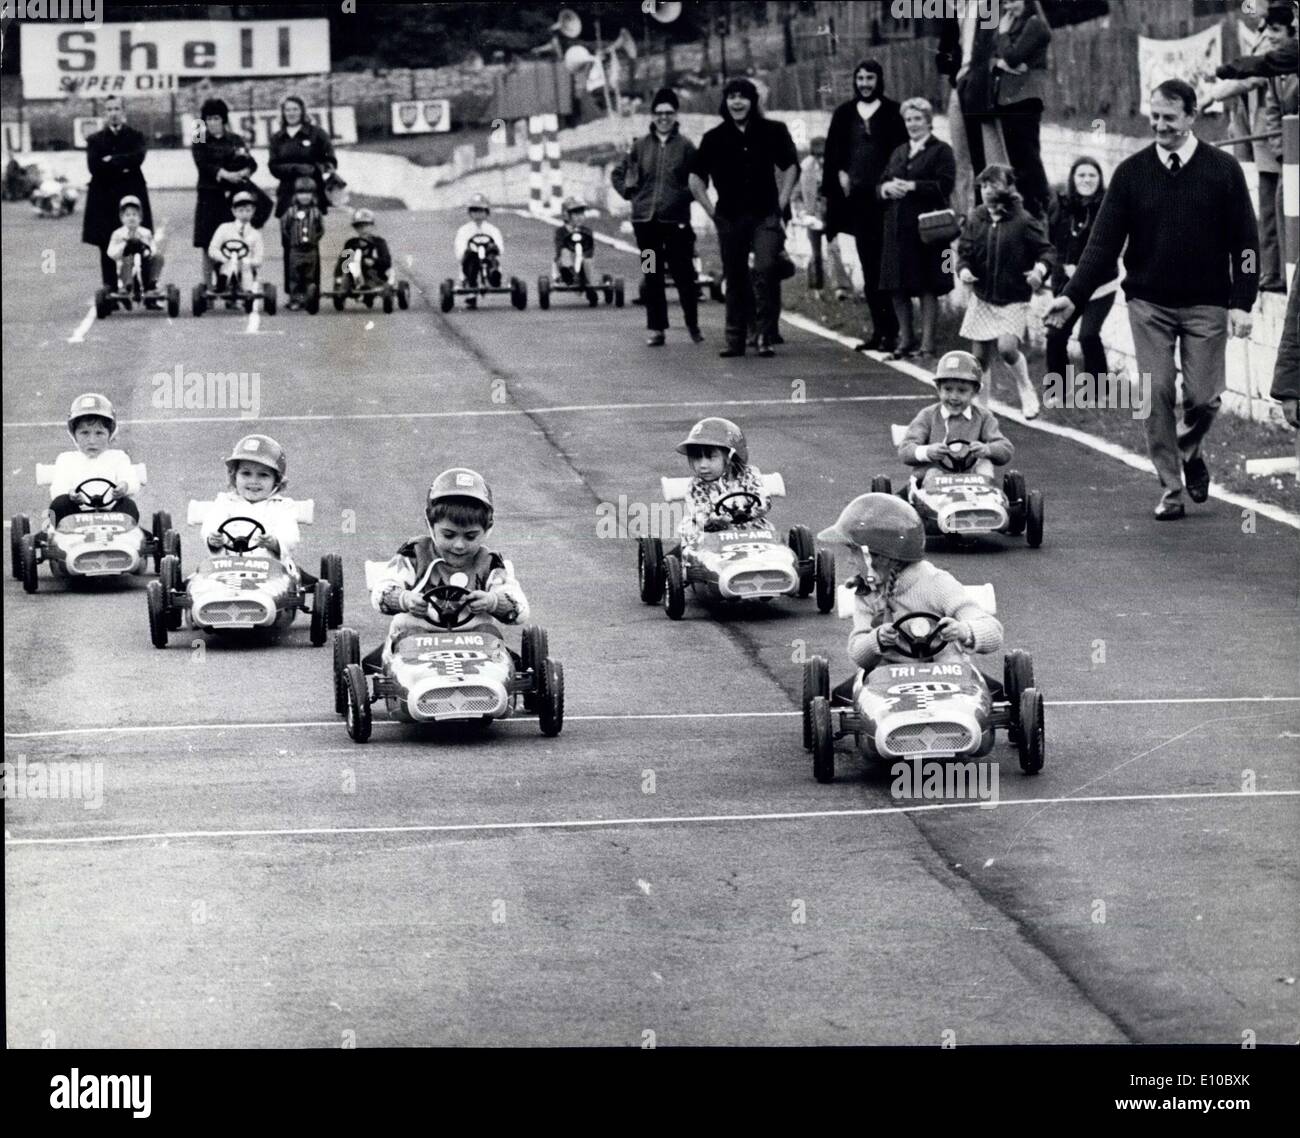 Jun. 04, 1972 - Budding Young Racing Drivers Compete in the ''Junior Grand Prix'' Championships at Crystal Palace: The Rac's ''Junior Grand Prix'' finals took place today when budding young racing drivers made there debut on the Crystal Palace famous racing circuit. The Junior GP is young competitors under the age of six. The young competitors race along a 75-yeard straight in special crash helmet. Photo shows: The competitors race along the straight course for the winning post in today's Junior Grand Prix. Stock Photo